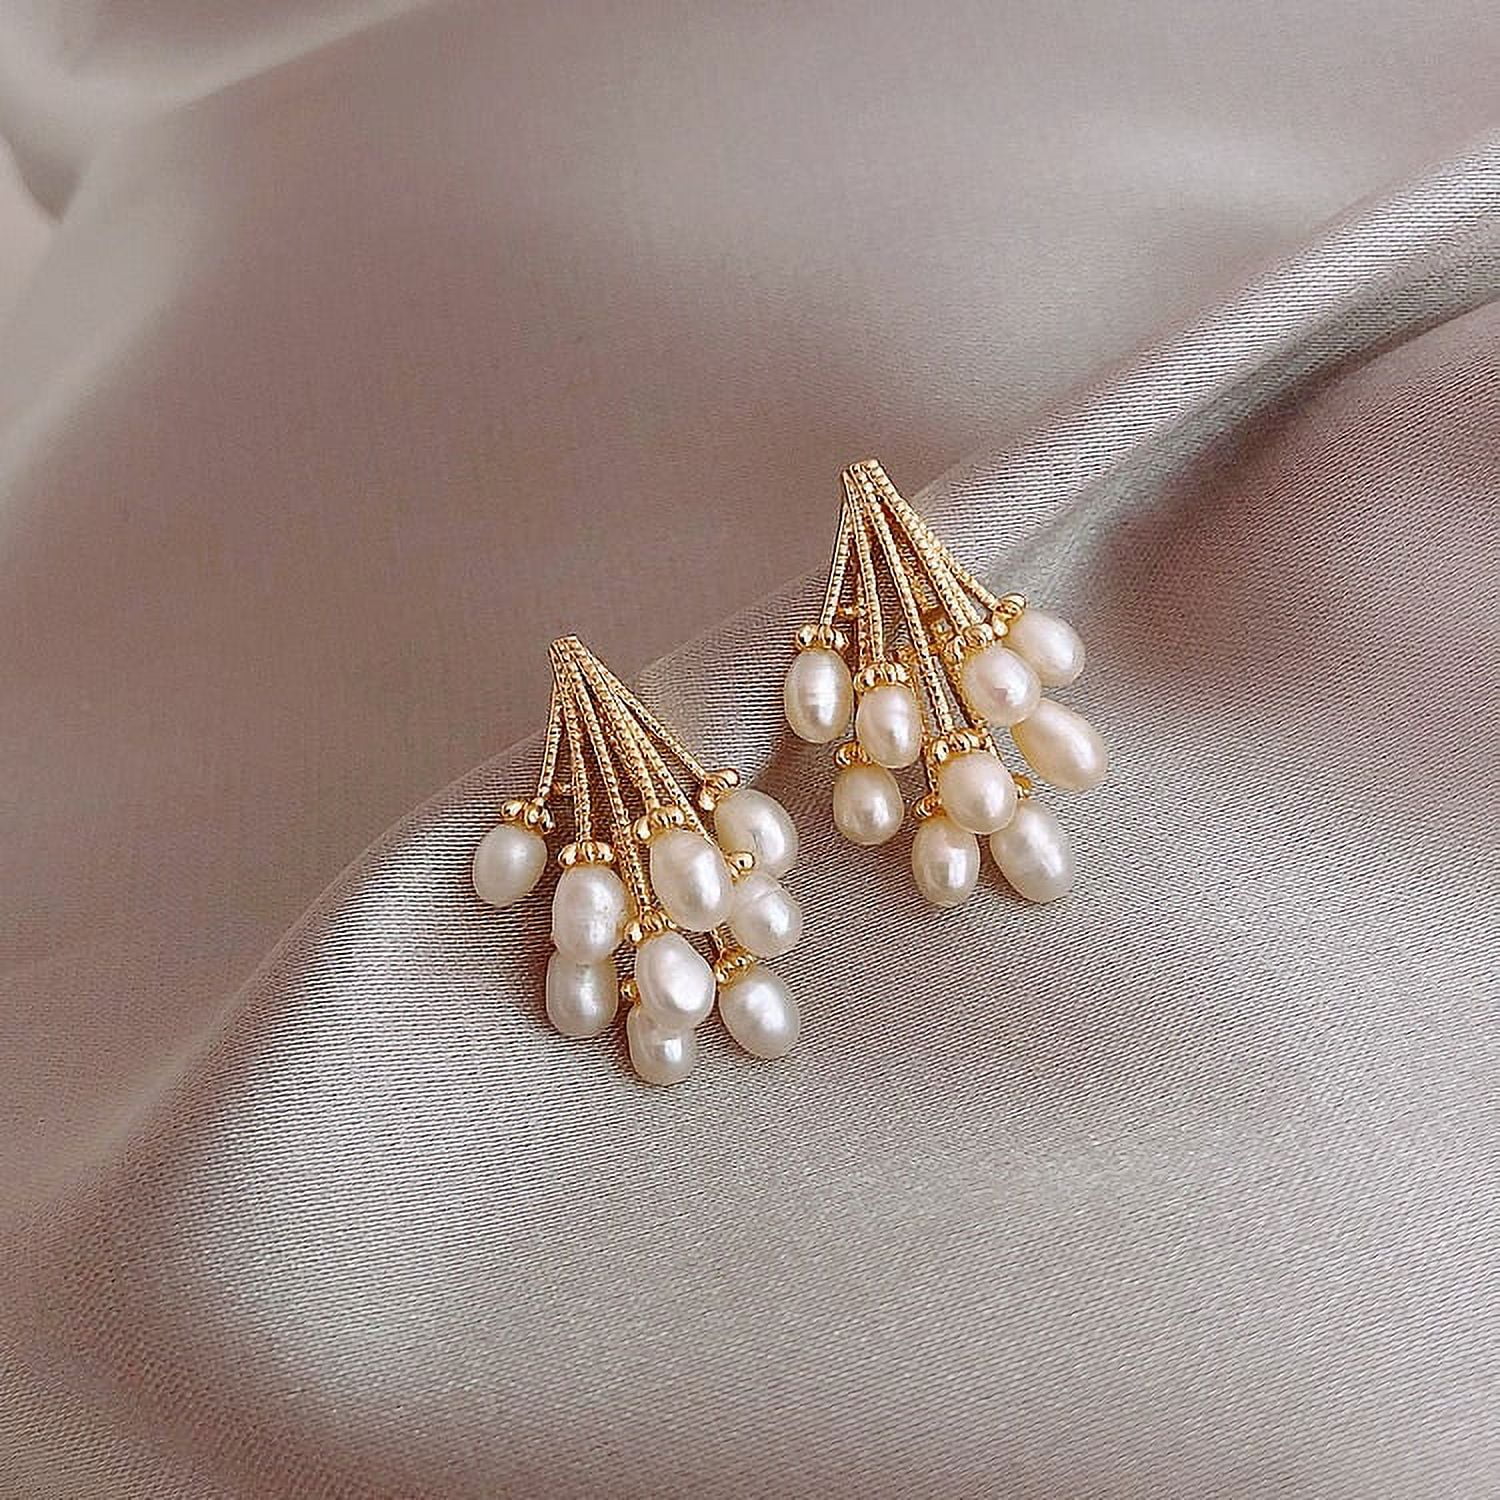 Vintage Italian Gold Earrings with Pearl Drops — Isadoras Antique Jewelry